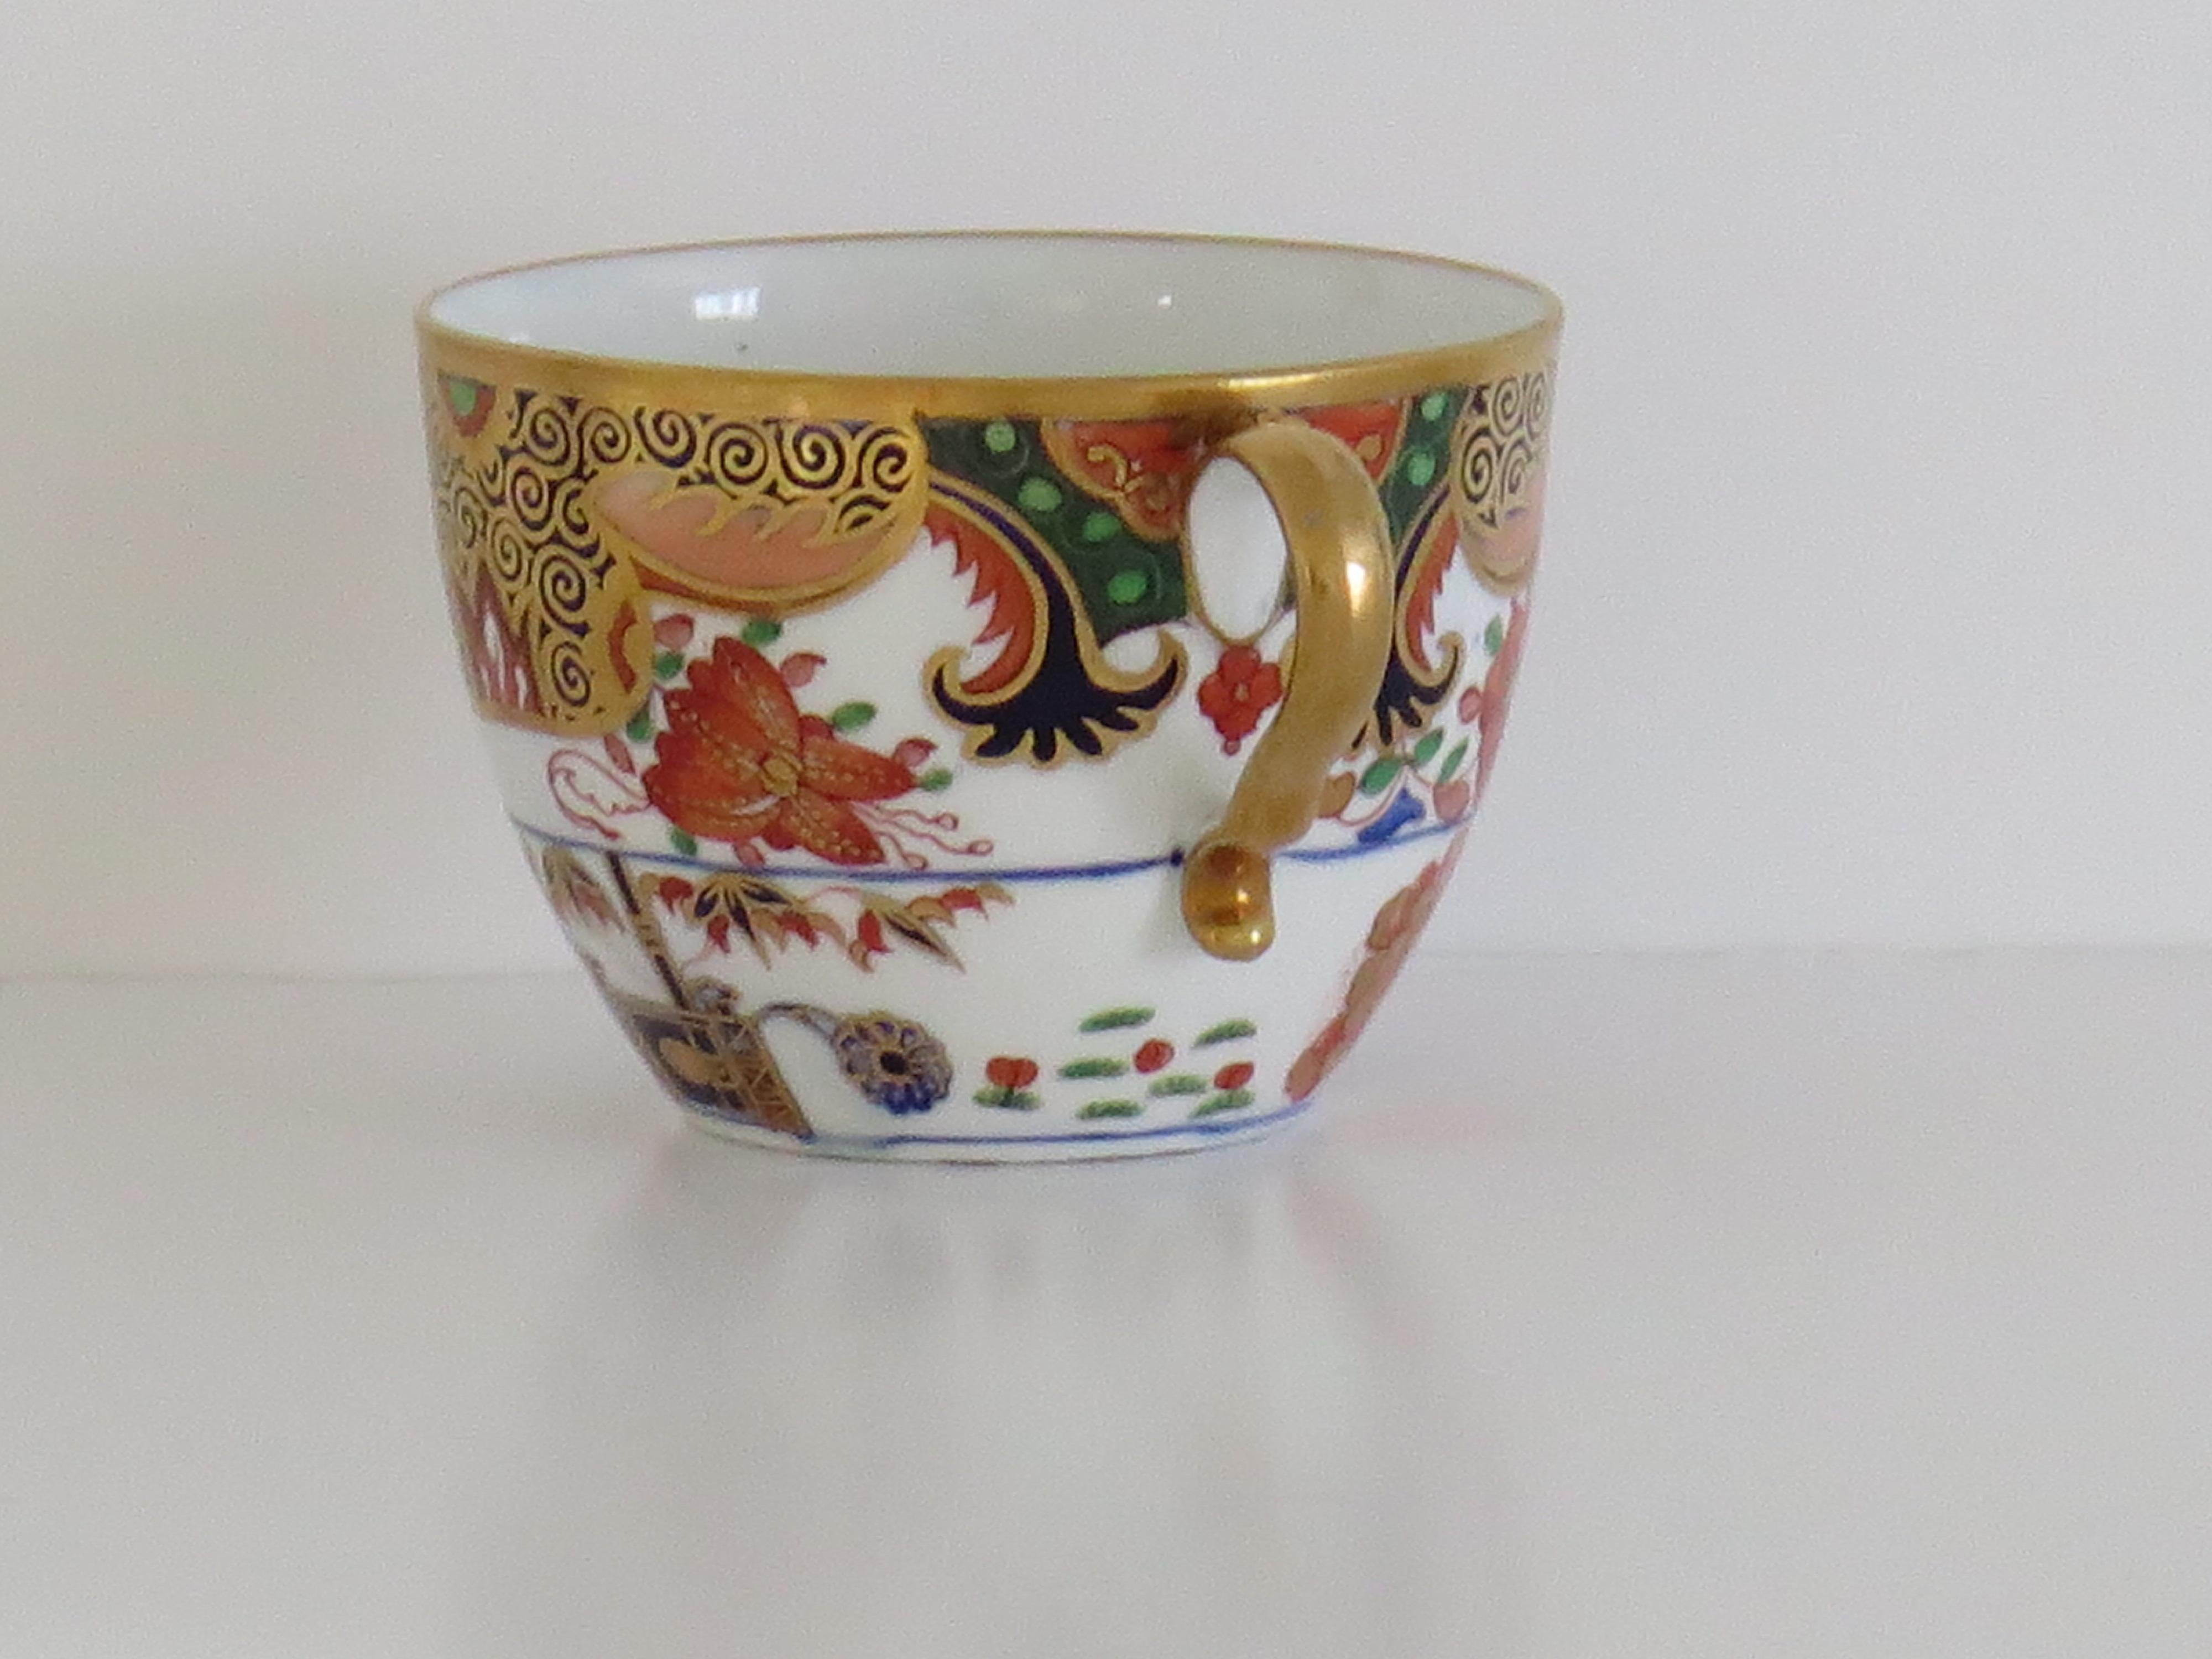 George III Spode Porcelain Tea Cup in Hand Painted & Gilded Pattern 967, circa 1810 For Sale